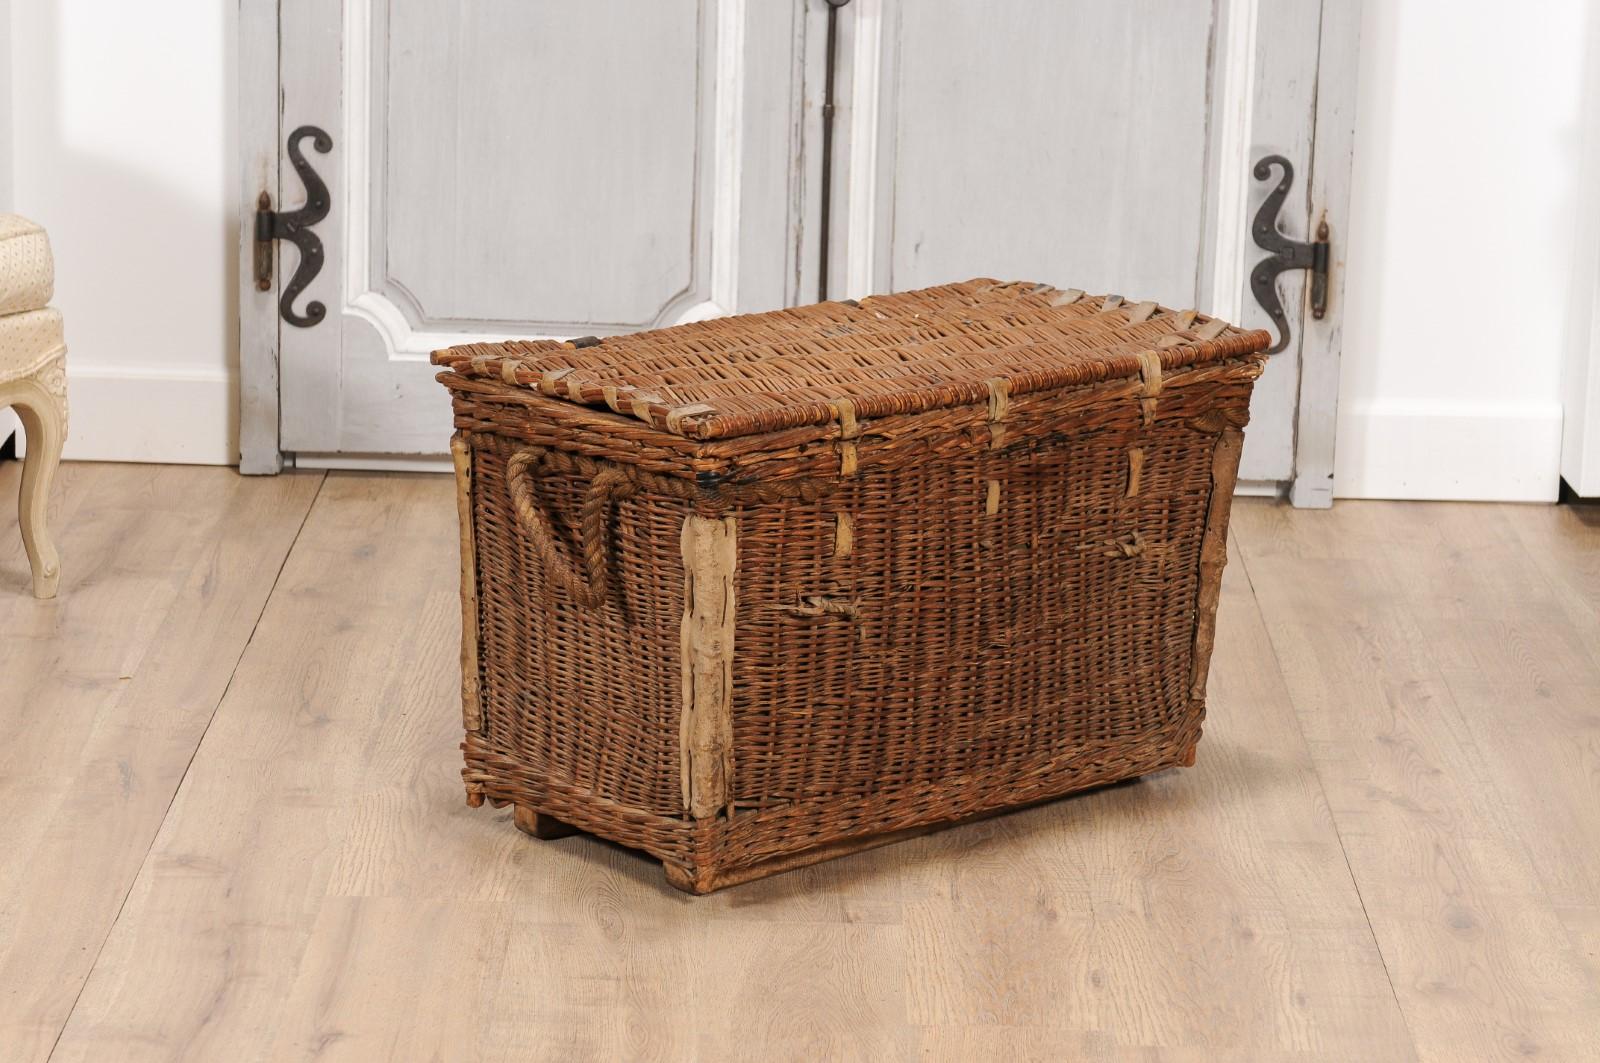 English Rustic 1930s Wicker Trunk with Iron Hardware and Lateral Handles For Sale 4